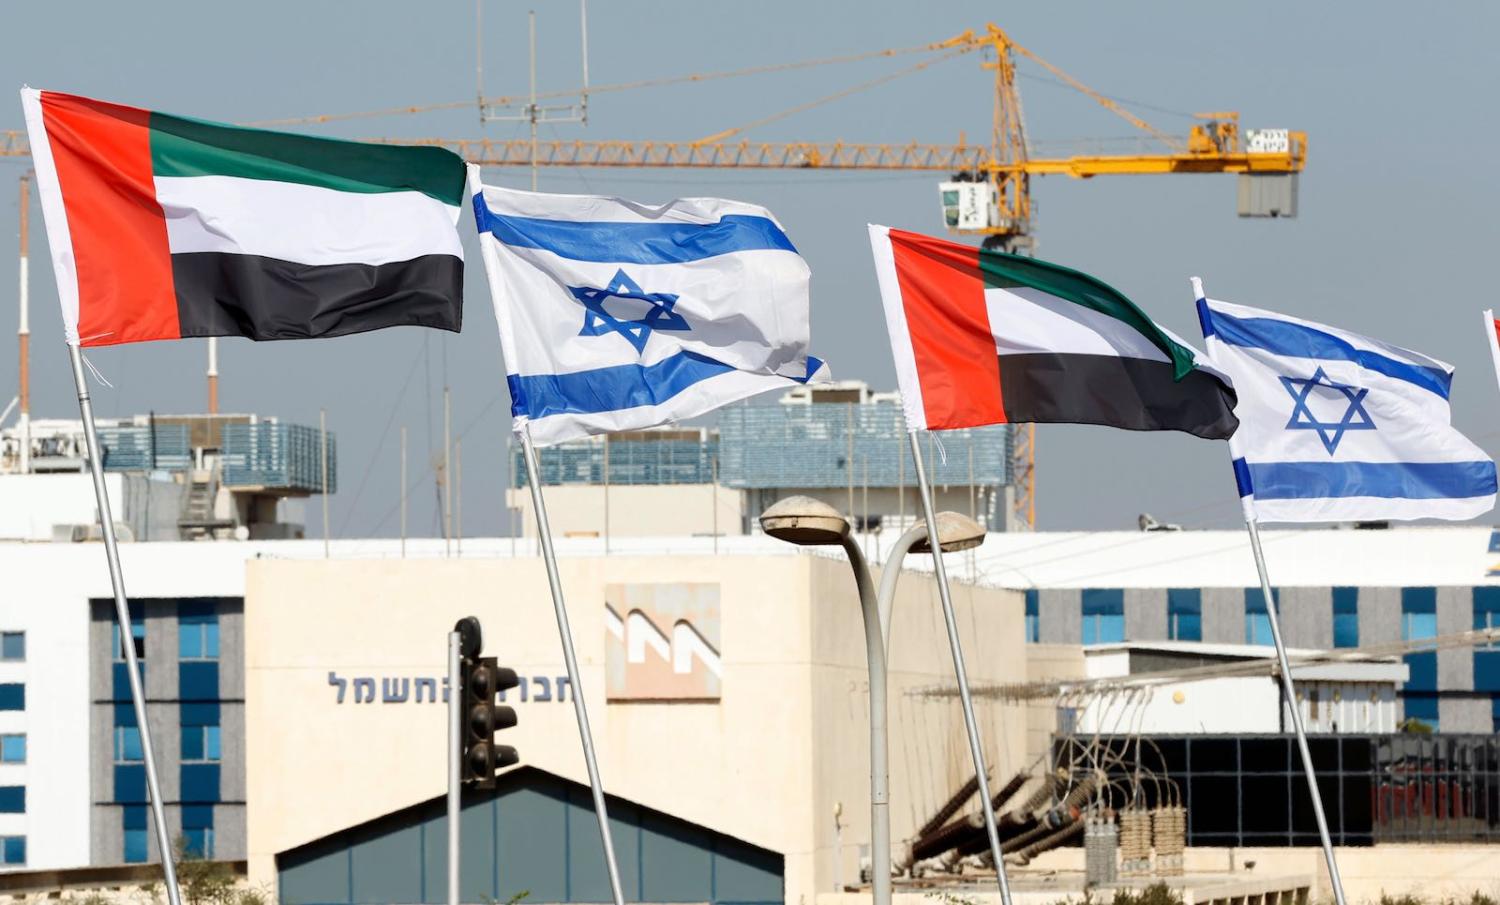 Israeli and United Arab Emirates flags line a road in the Israeli city of Netanya, 16 August 2020 (Jack Guez/AFP via Getty Images)